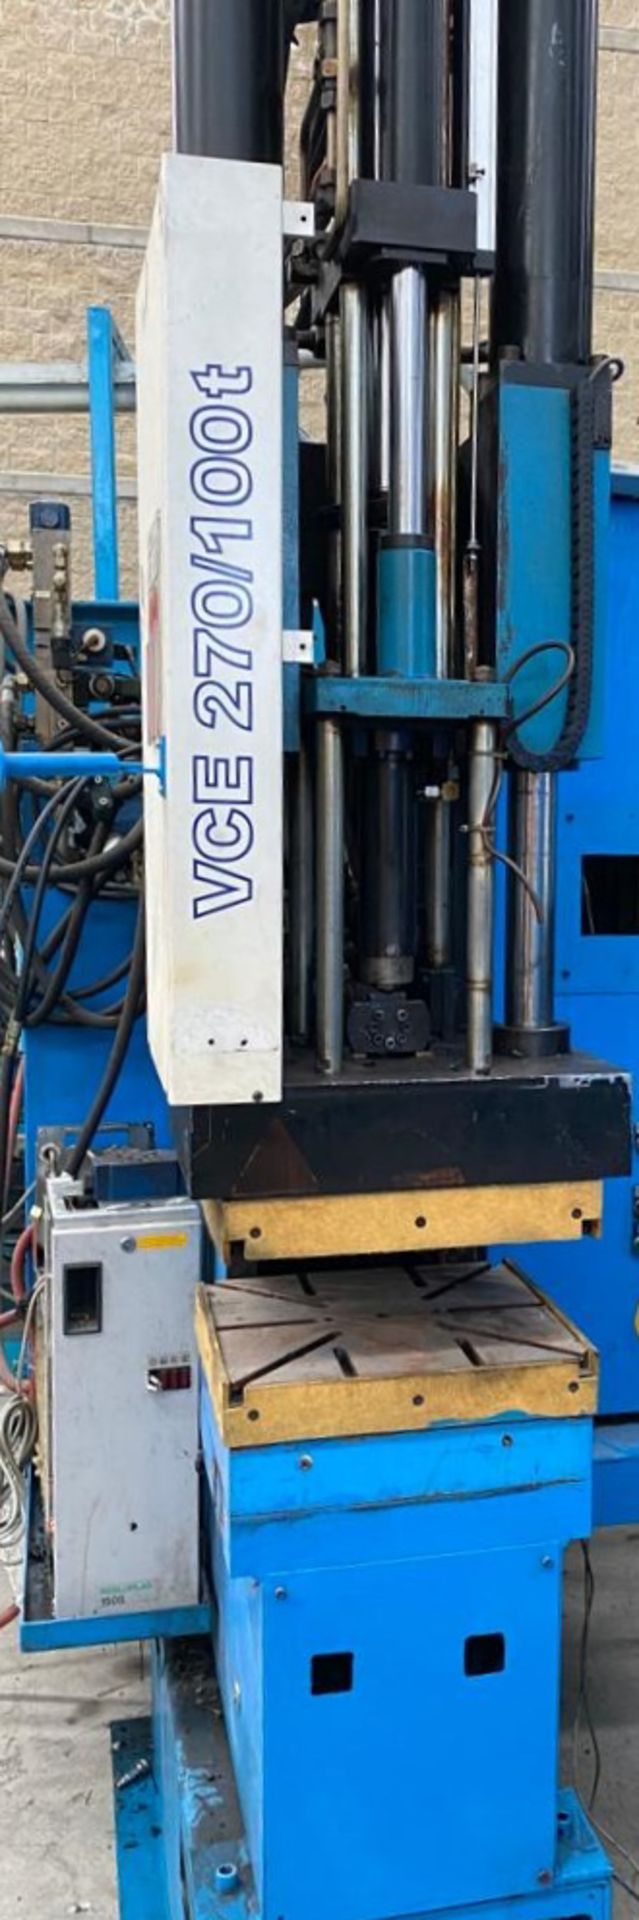 LWB STEINL (2002) VCE-T EPDM INJECTION PRESS WITH 27 TON CAPACITY, APPROX. 12" X 12" TOP DOWN MOLD